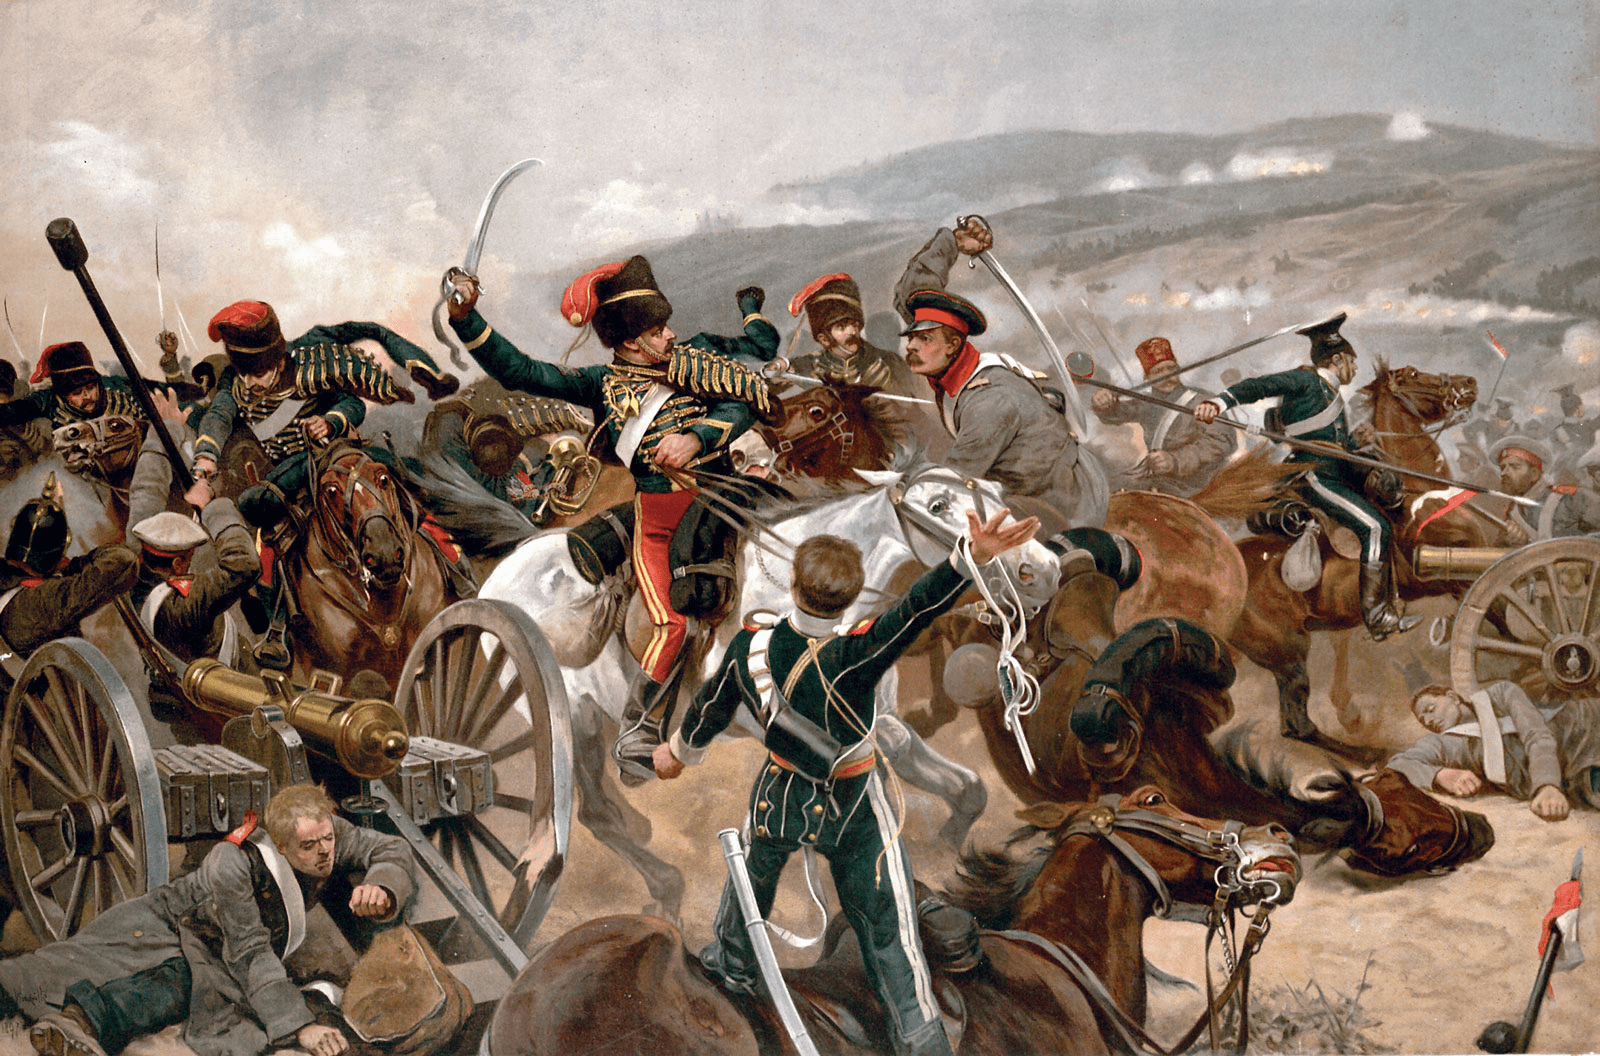 a painting depicting British cavalry fighting Russian forces in 1854 